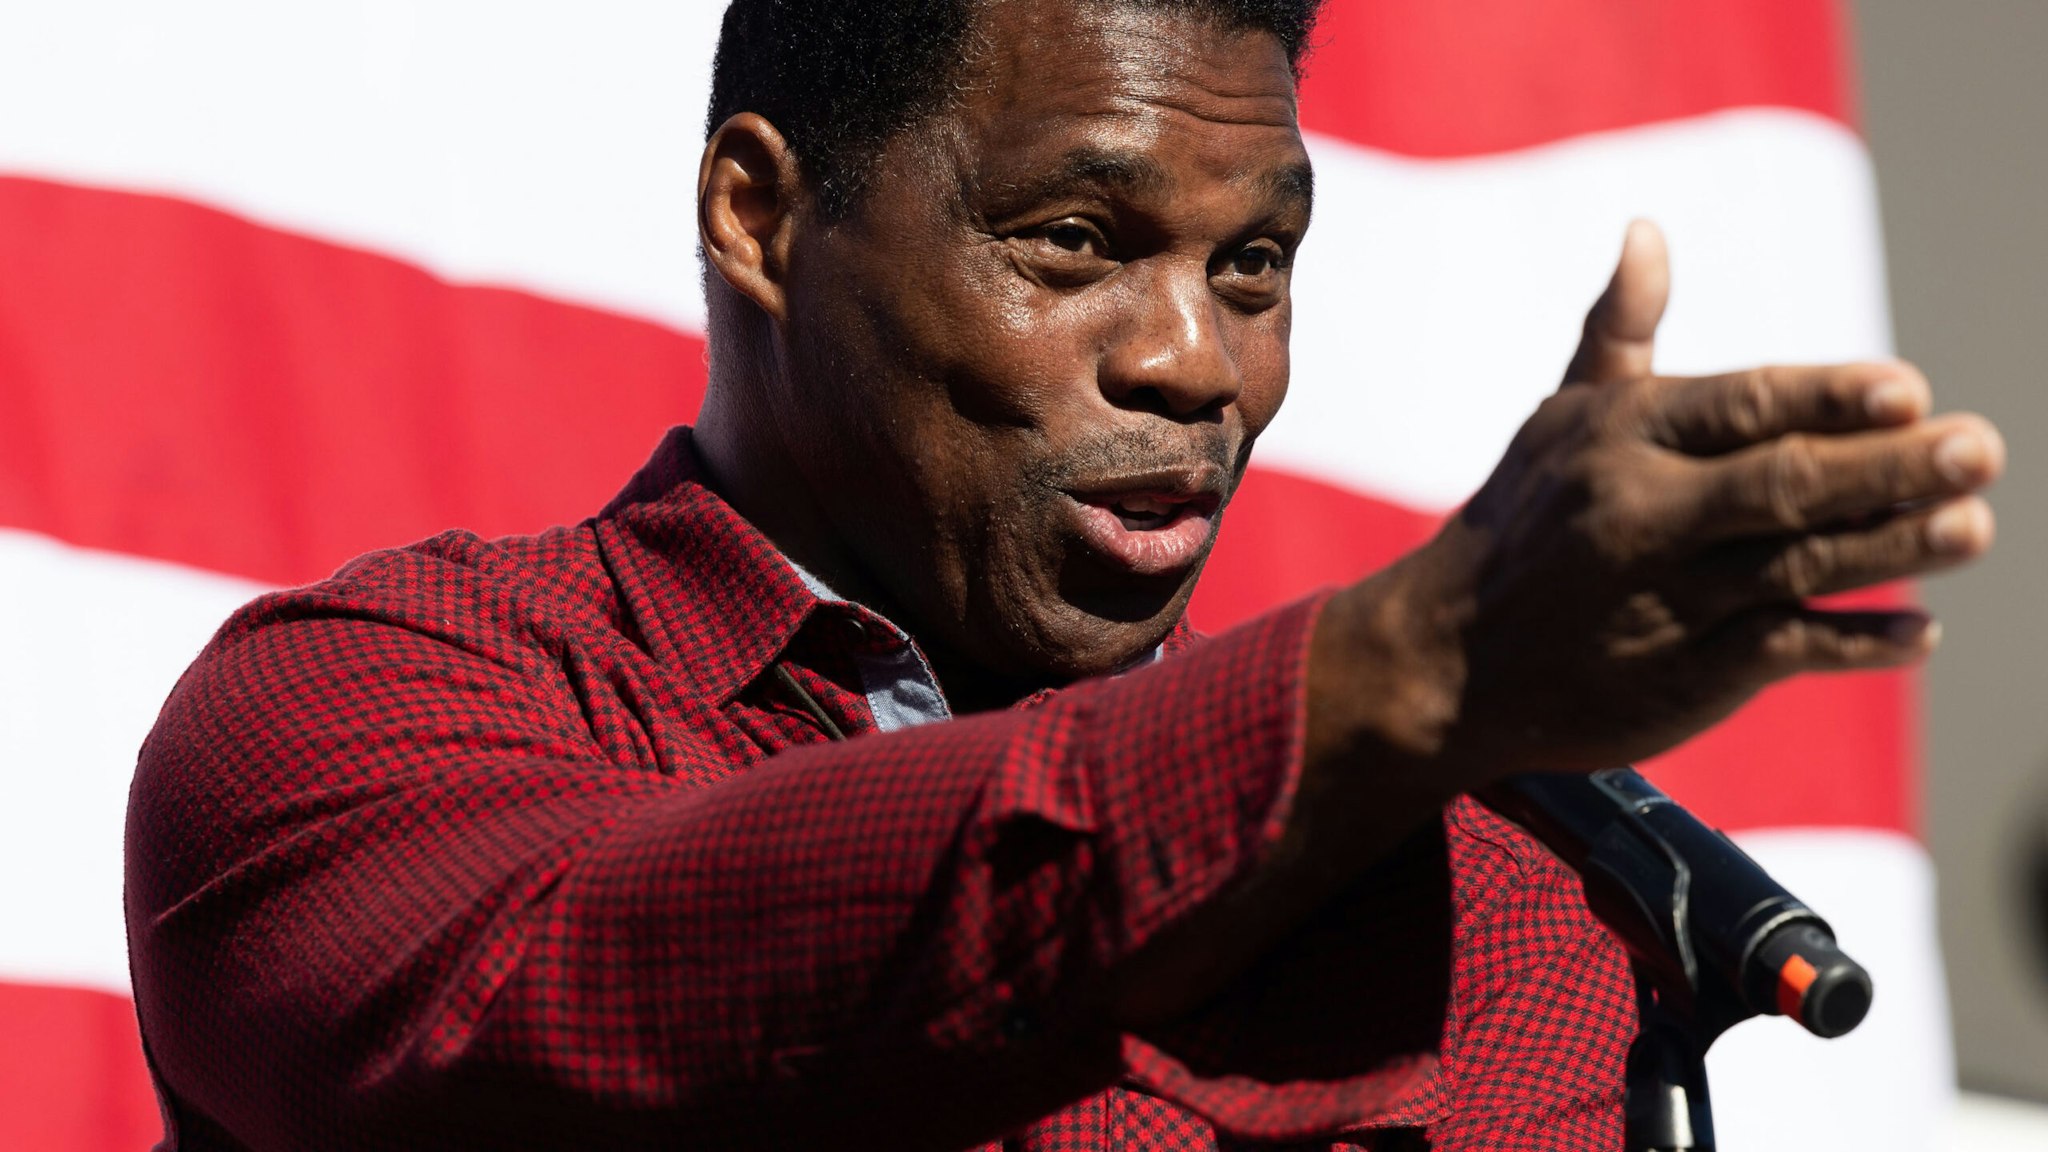 MACON, GA - OCTOBER 20: Georgia Republican Senate nominee Herschel Walker addresses the crowd of supporters during a campaign stop on October 20, 2022 in Macon, Georgia. Walker in running against incumbent Senator Raphael Warnock (D-GA) in the mid-term elections.